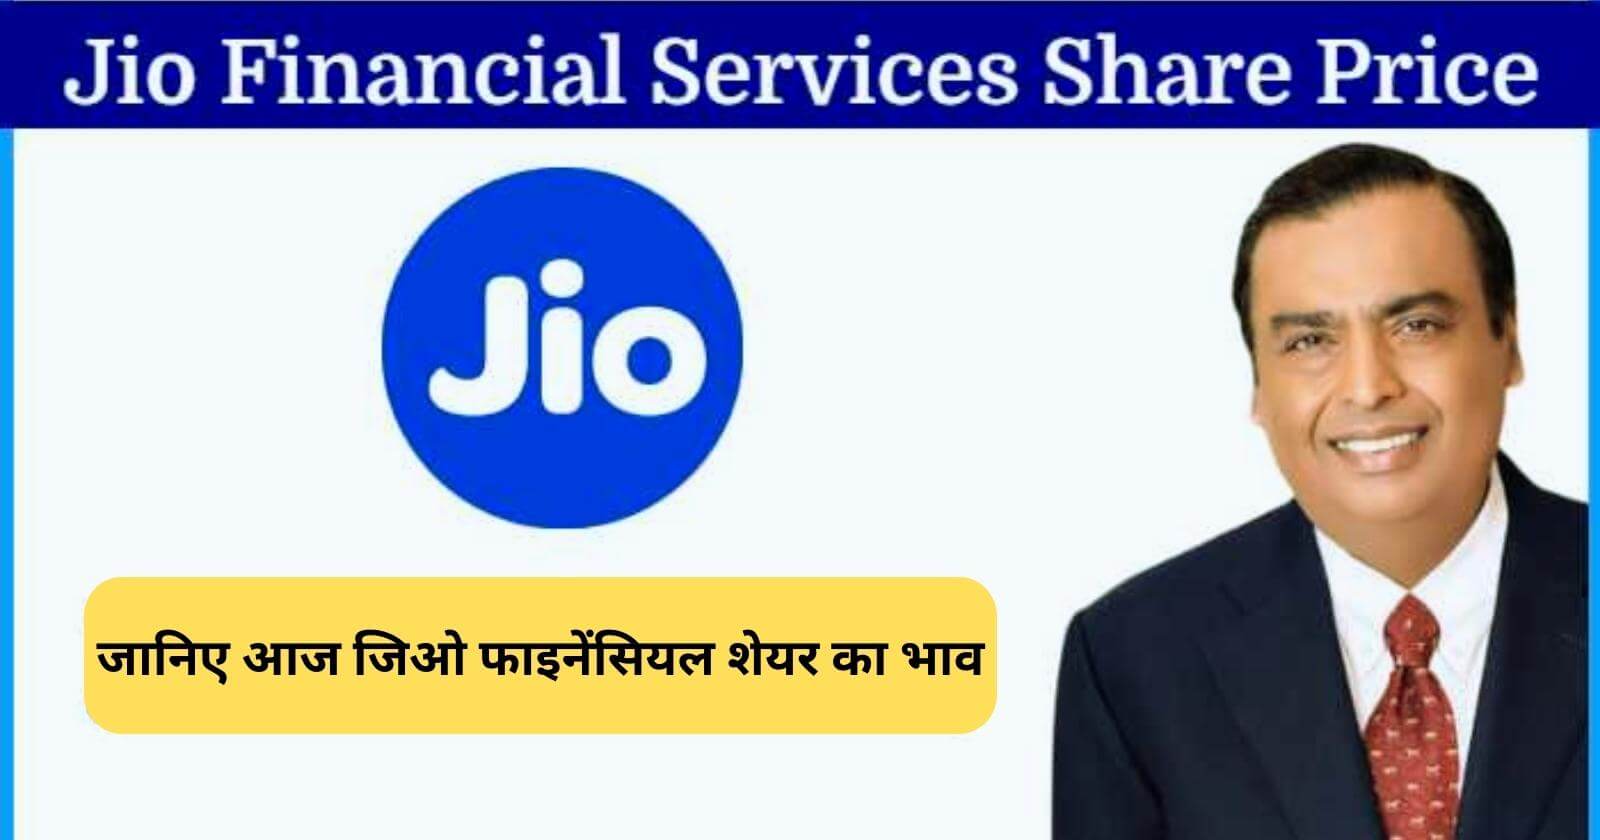 Today Jio Financial Services Share Price Update